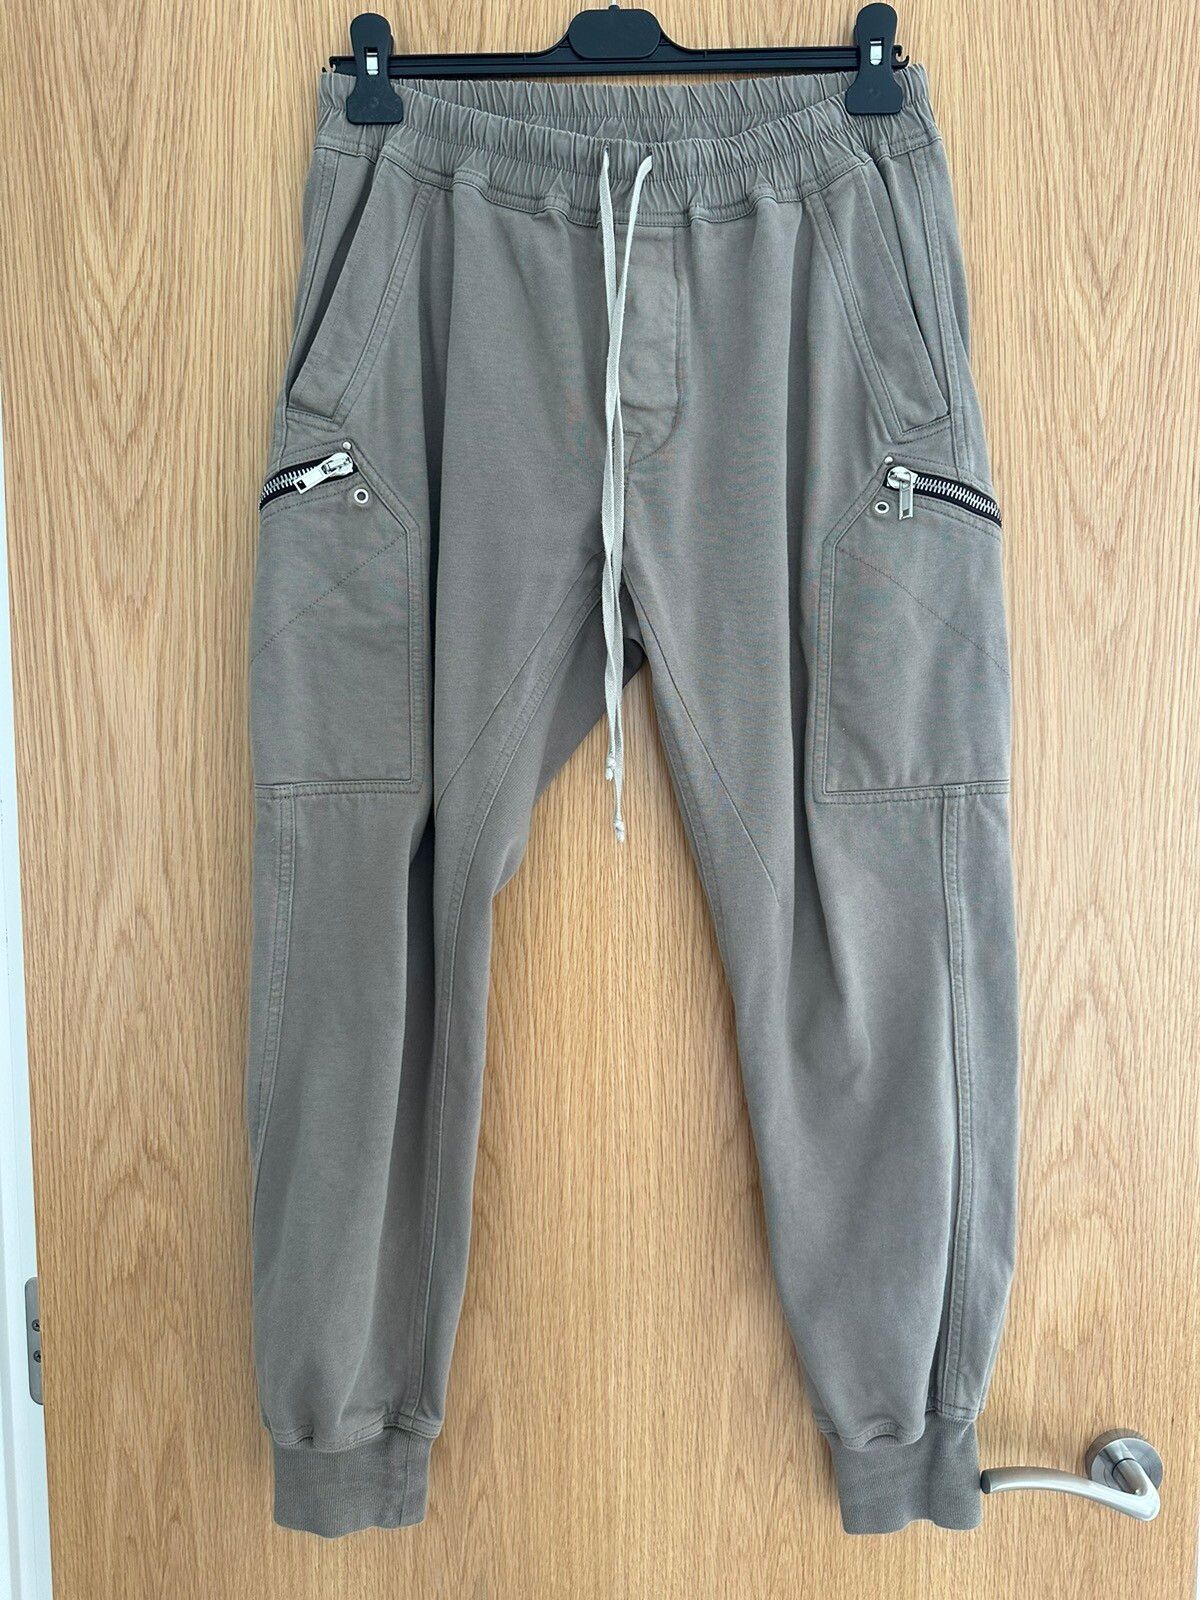 Rick Owens Rick Owens Jogger Trousers | Grailed